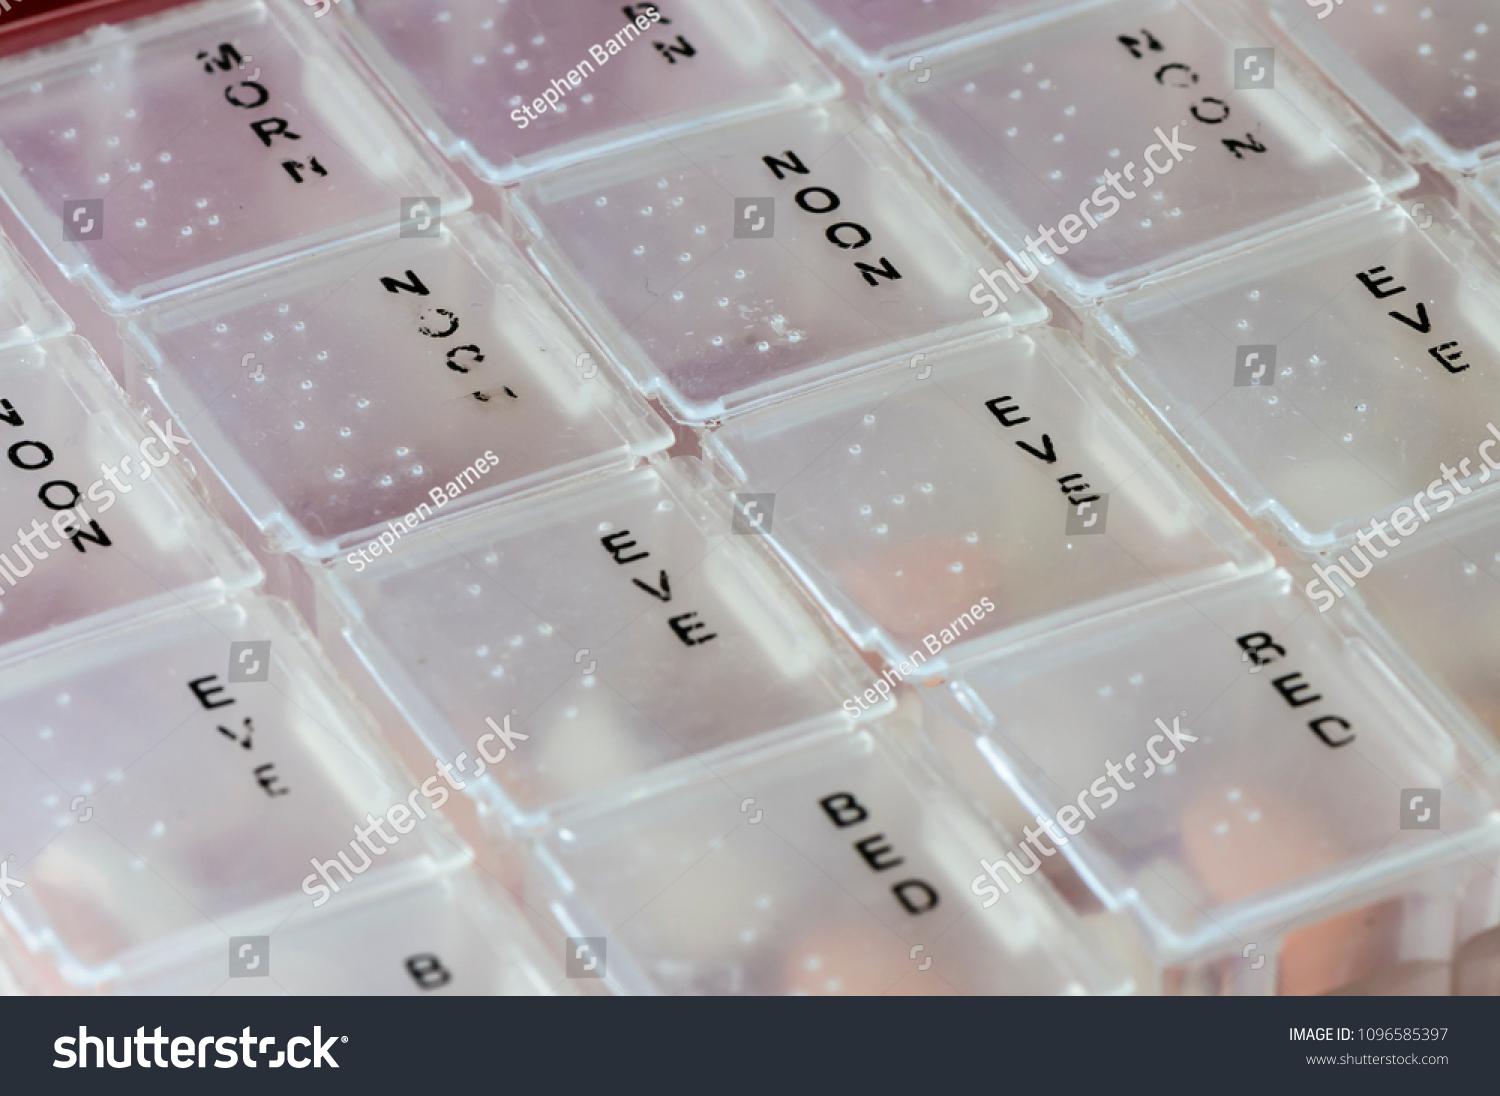 Close up of a segmented pill box for morning, noon, evening and bedtime medications with braille. #1096585397